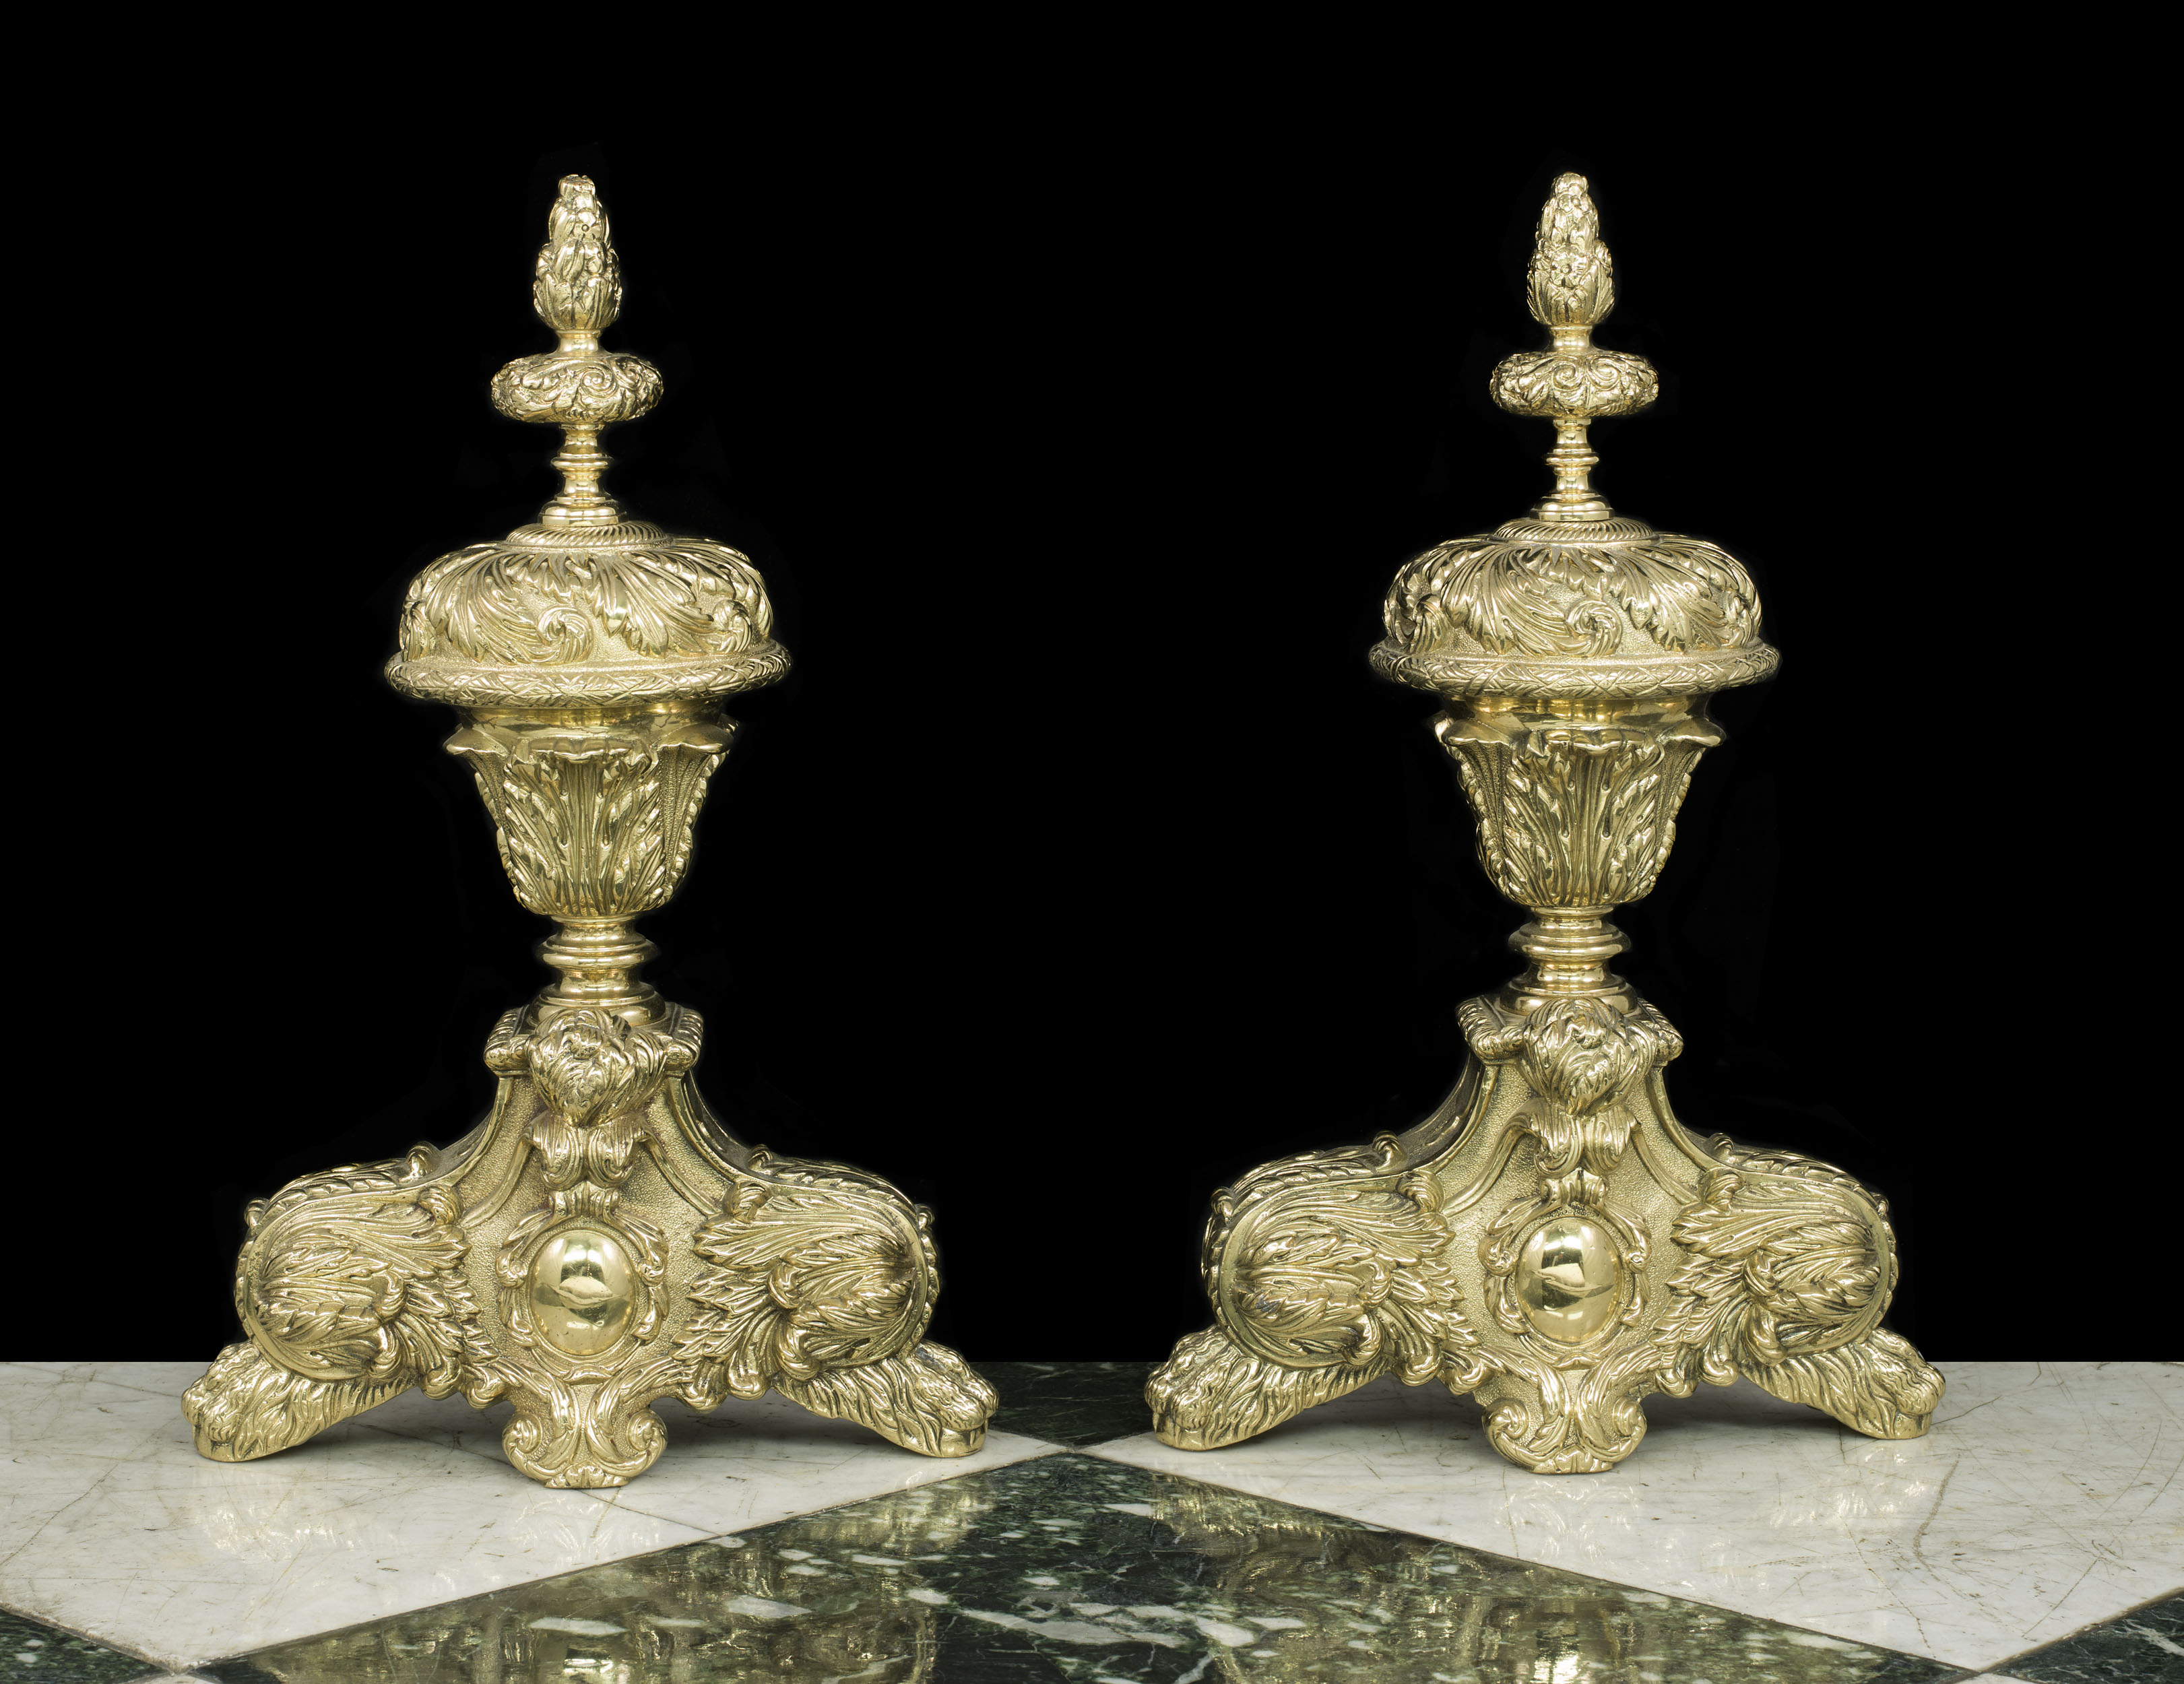  Early 20th century pair of brass Baroque style chenet